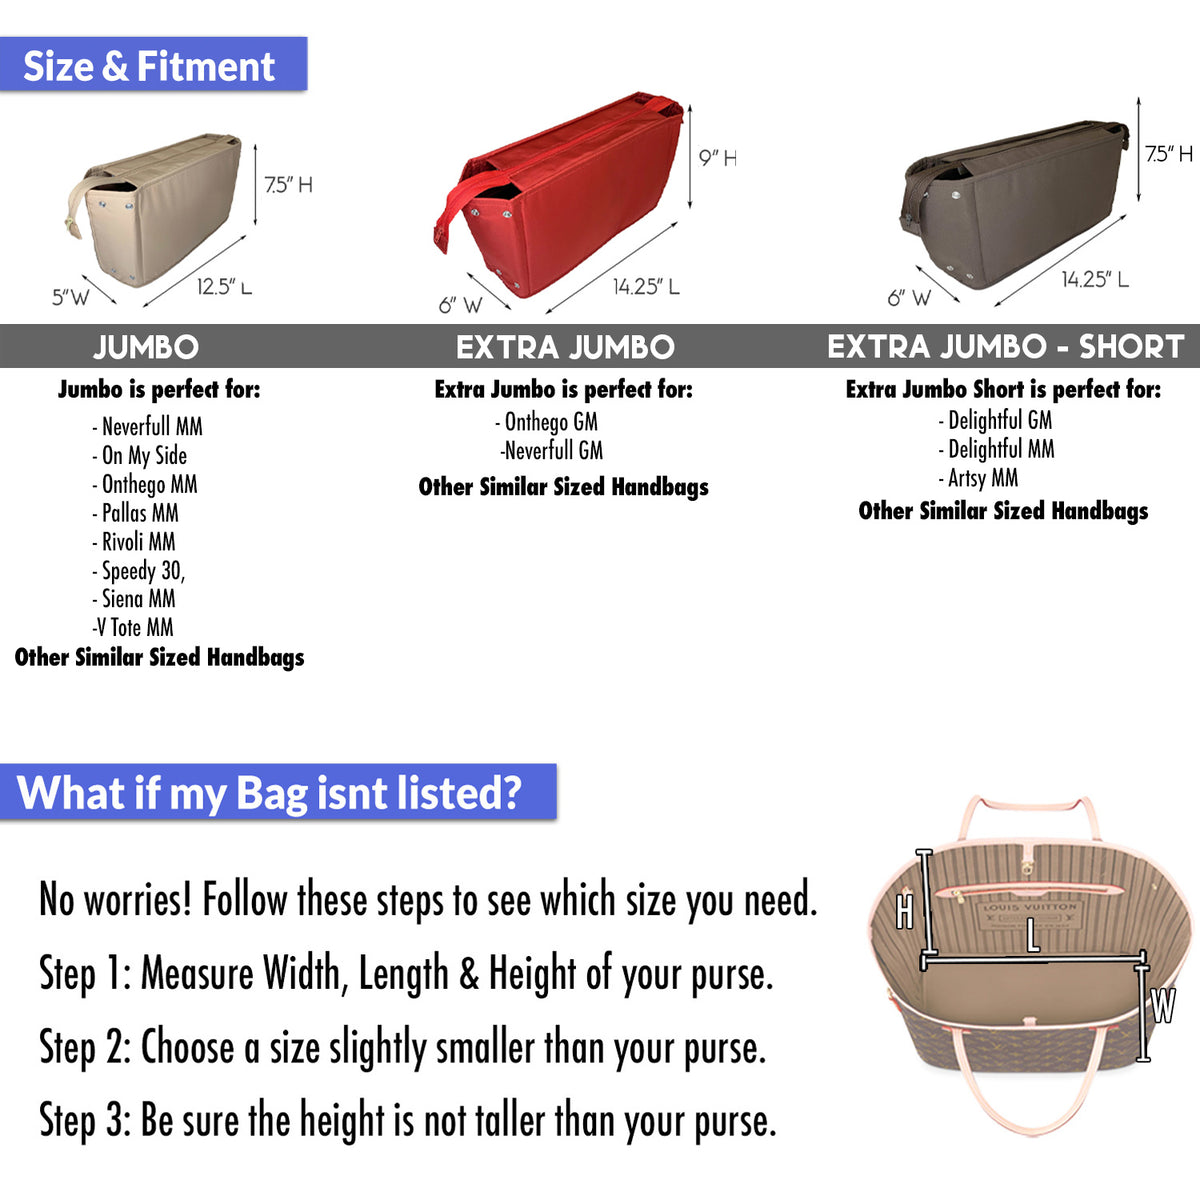 A CATALOG highlighting the different sizes of a Purse Bling Exclusive Zippered Purse Organizer Insert - Extra Jumbo - Short, featuring purse organizers and their innovative zipper designs for enhanced protection.